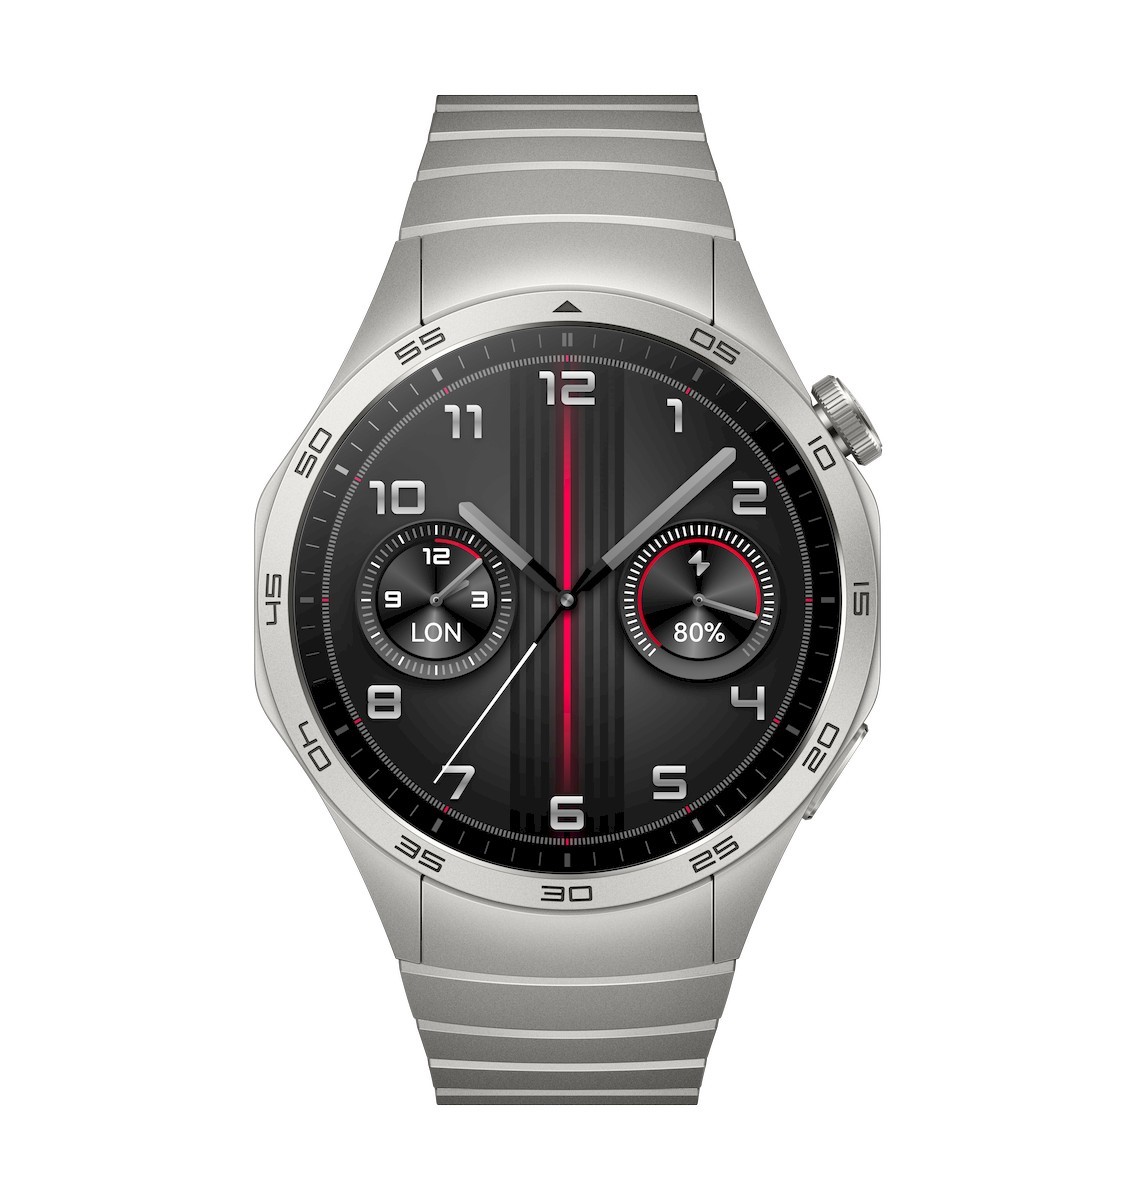 Huawei Watch GT4 launches in 41mm and 46mm sizes with improved